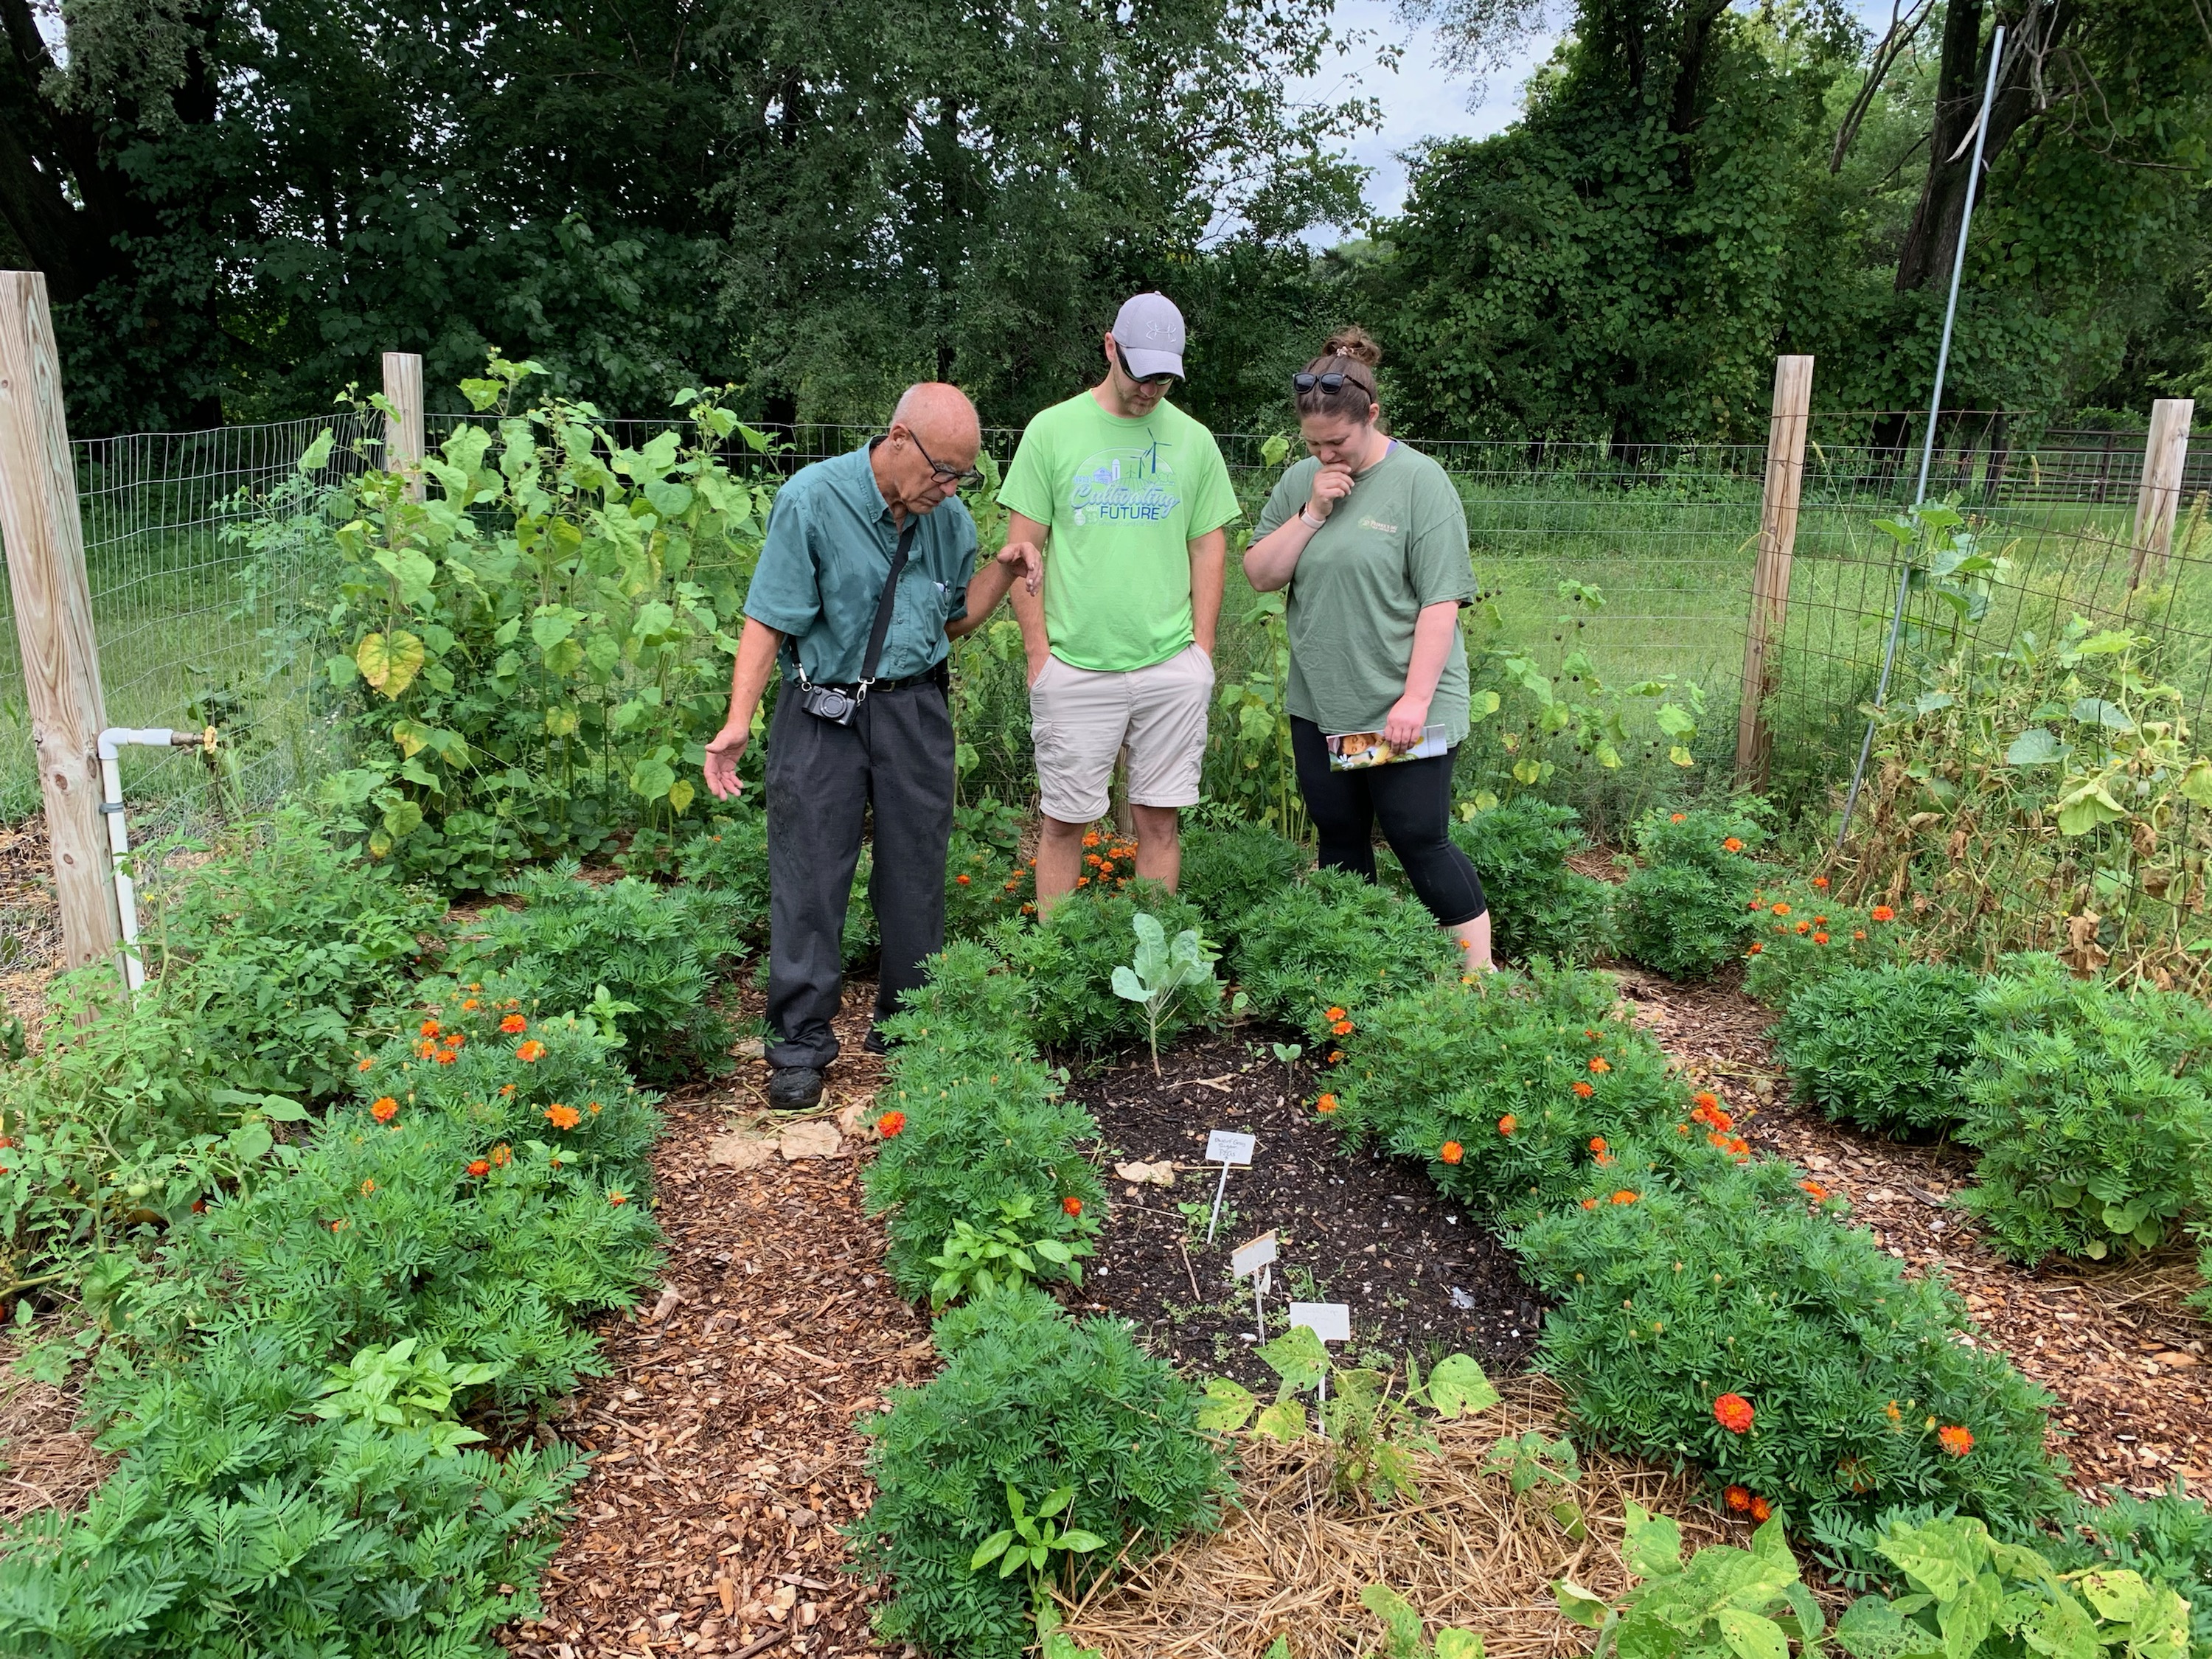 Community members in a garden during the 2022 farm crawl